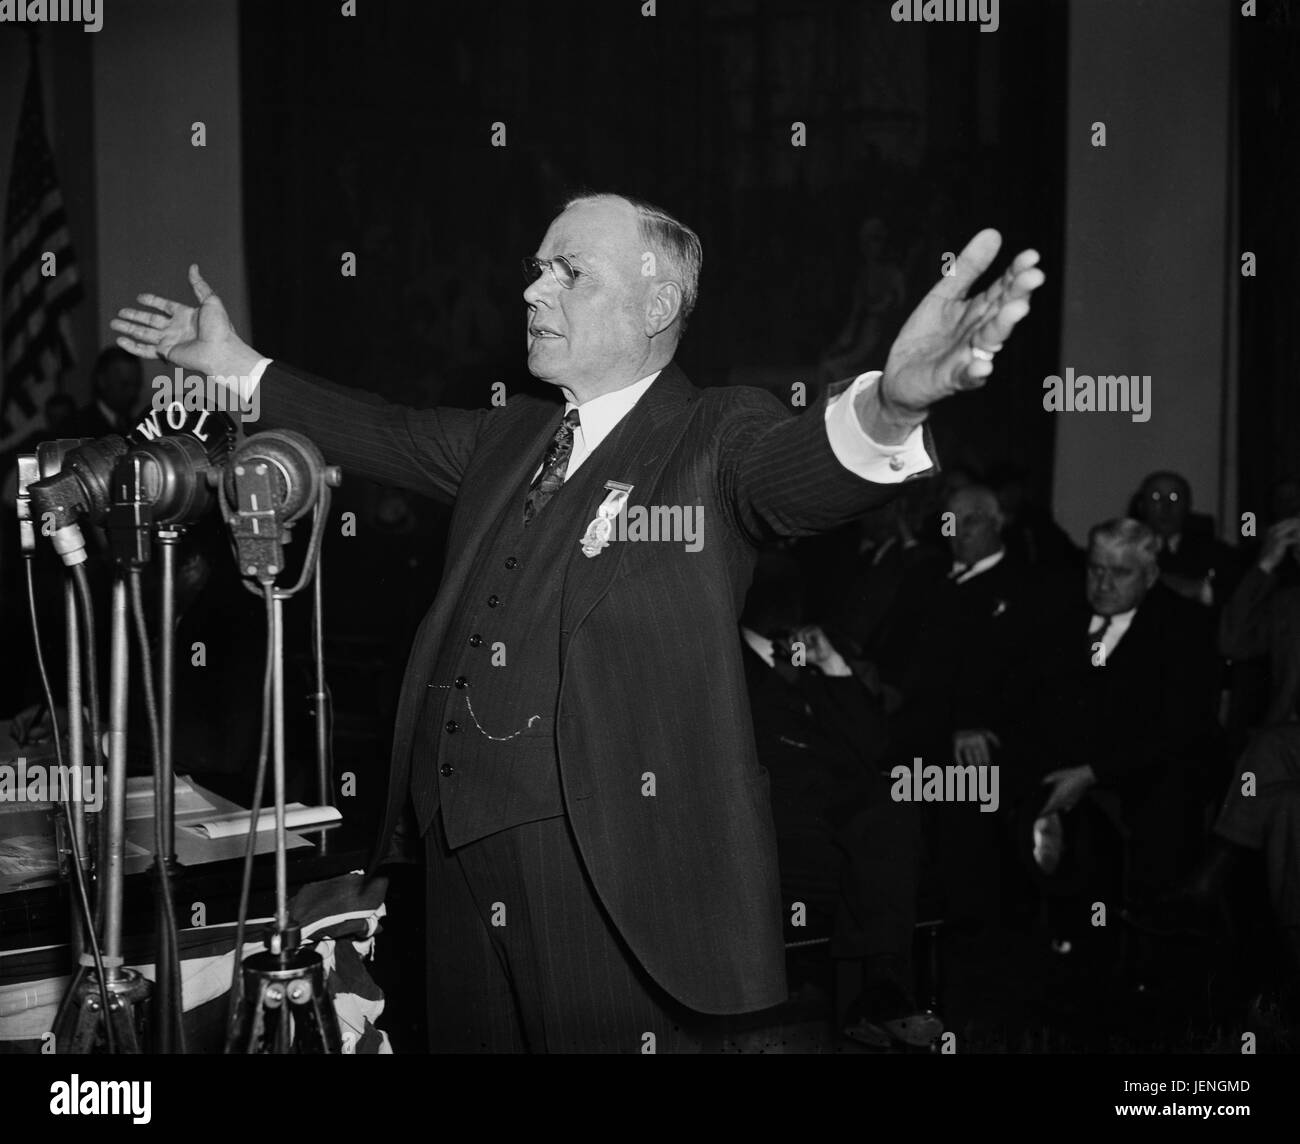 William Green, President of the American Federation of Labor, Portrait during Press Conference, Washington DC, USA, Harris & Ewing, February 1936 Stock Photo